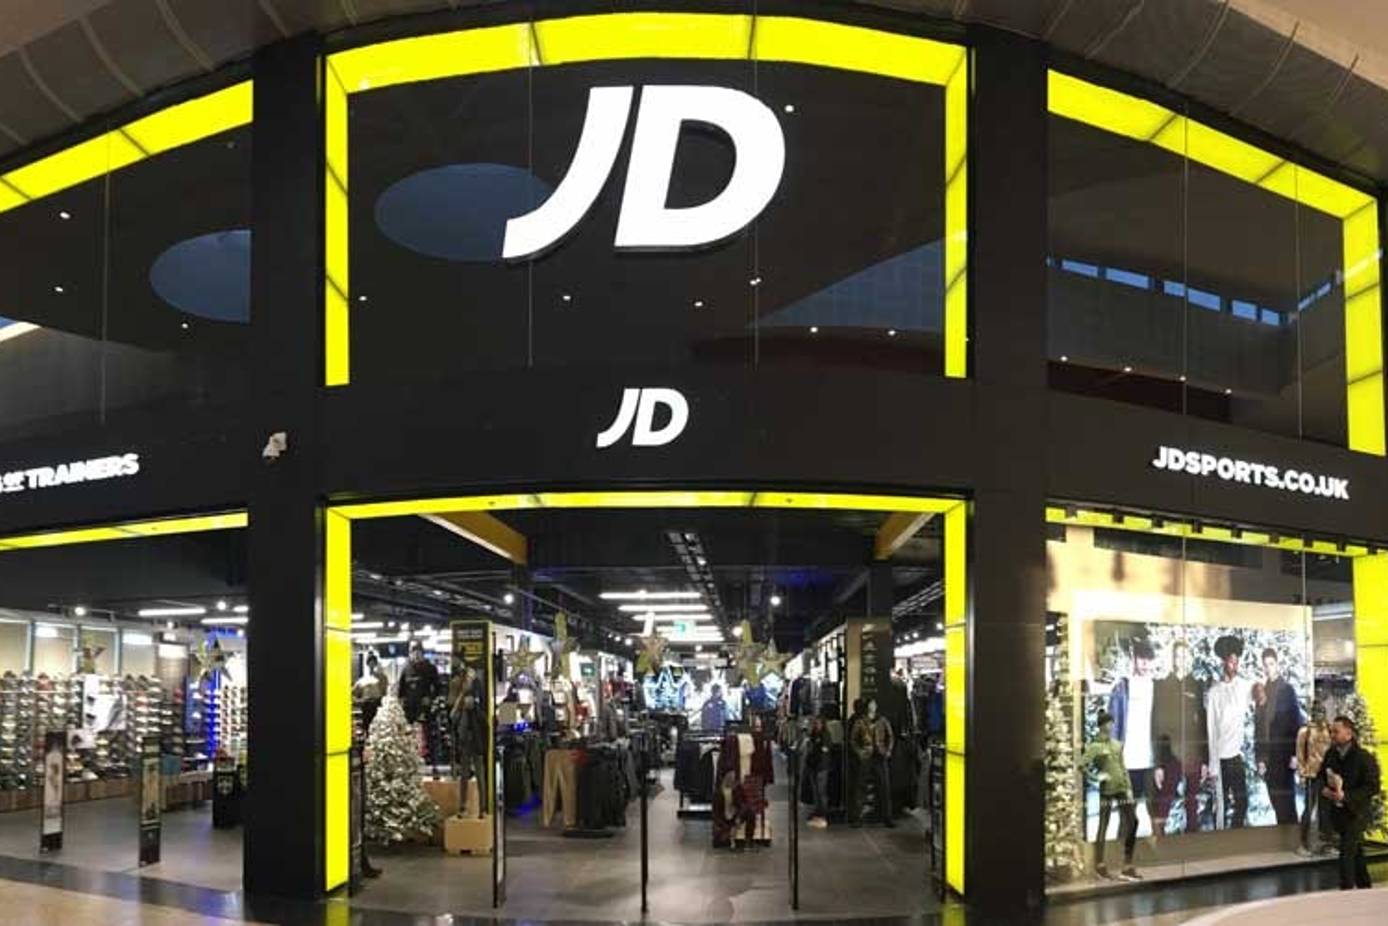 New York: JD Is Coming For You - JD Sports US